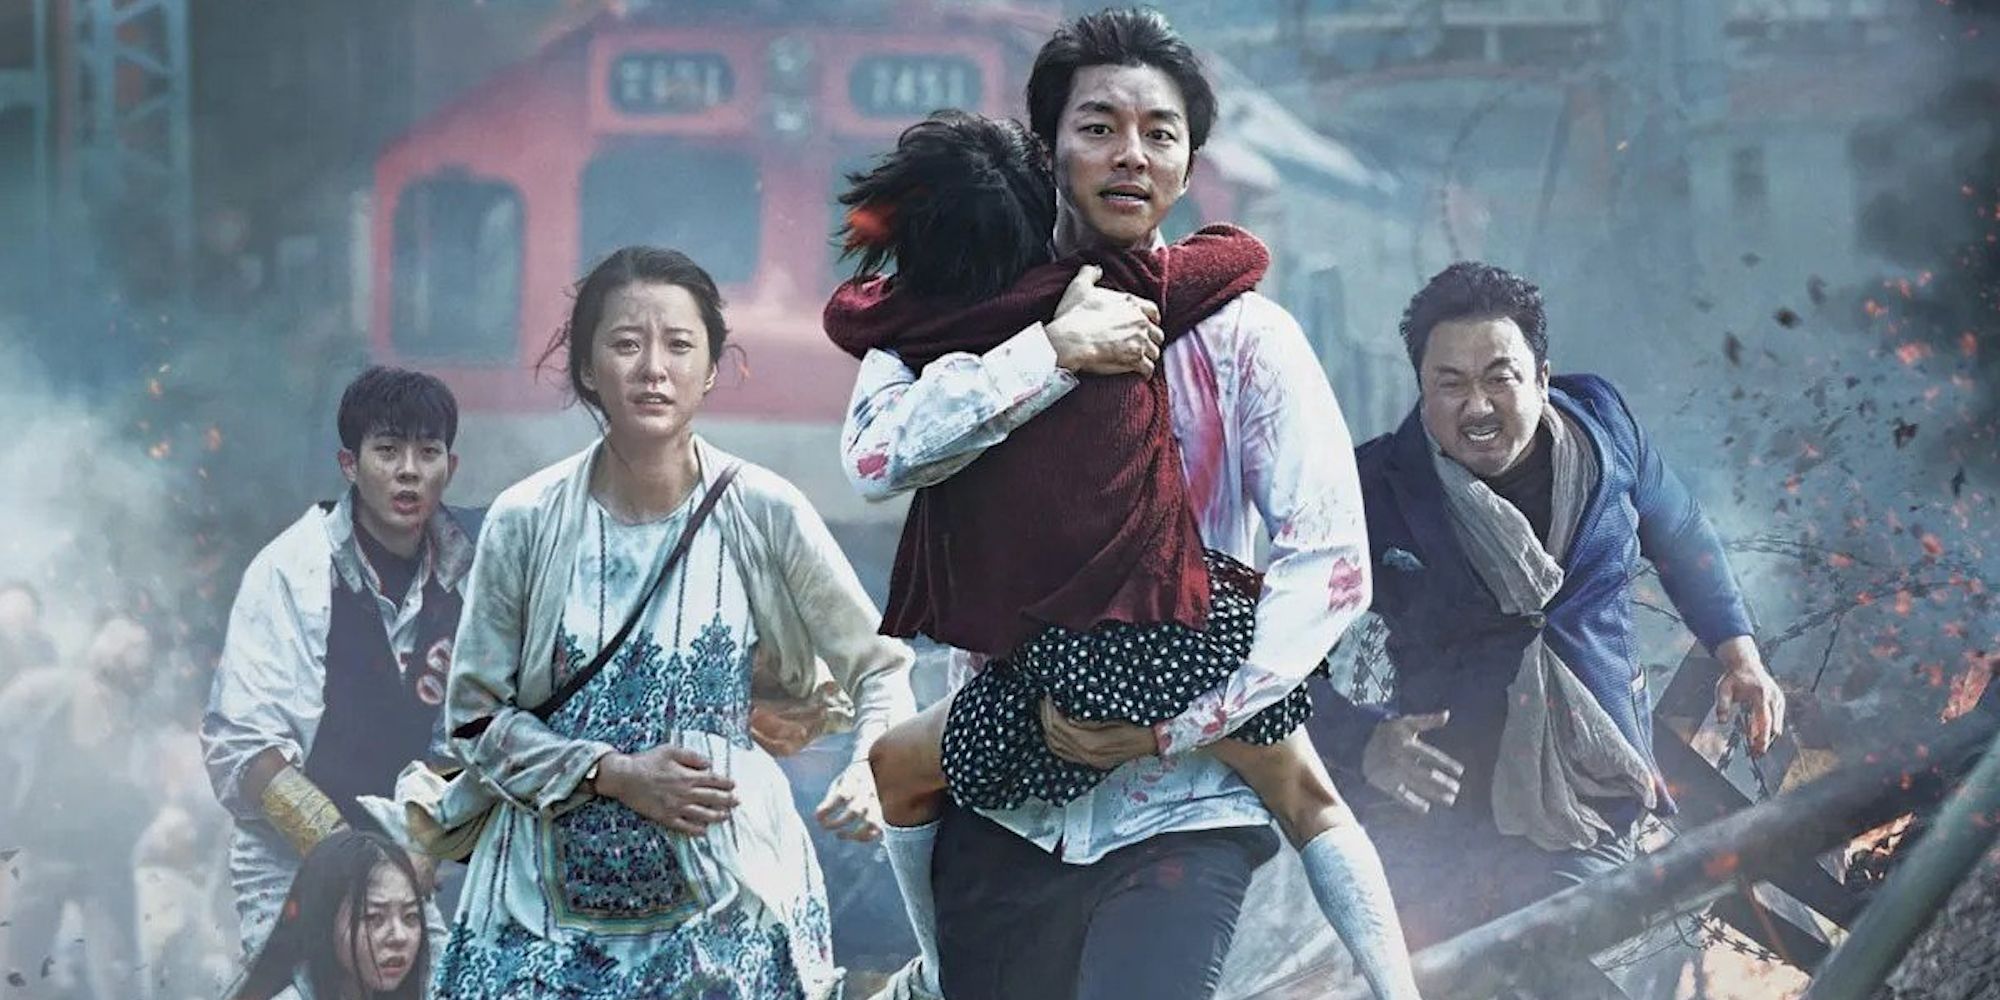 The main characters of Train to Busan running amidst the wreck.